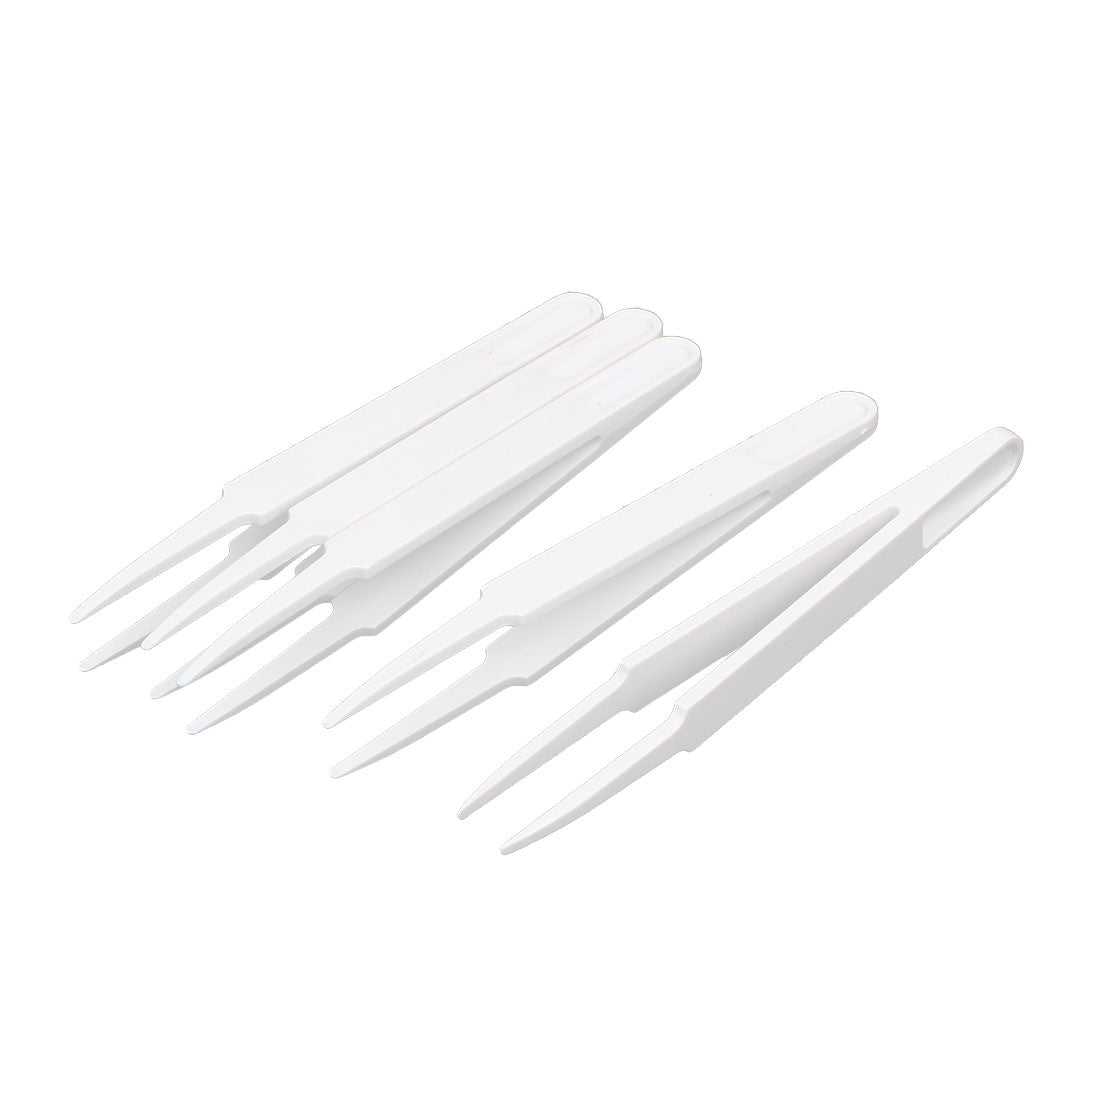 uxcell Uxcell Industrial Plastic Pointed Tip Anti-static Tweezers Hand Tool 115mm Long 5pcs 93303